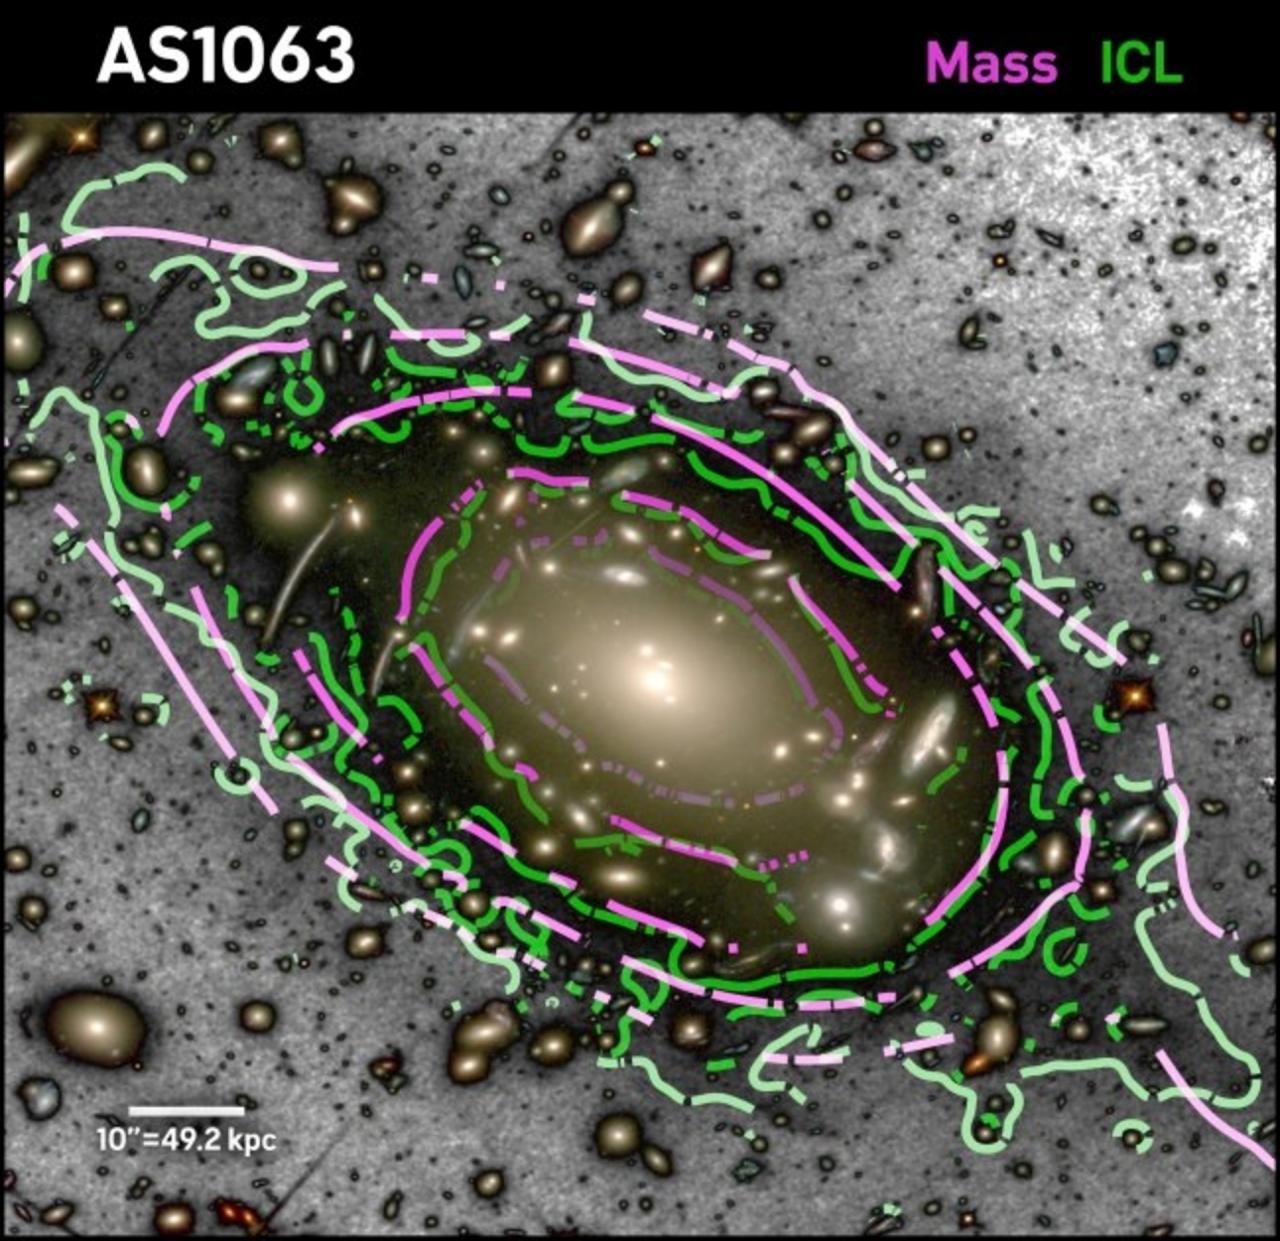 Image of the cluster of galalxies Abell S1063, at a distance of 4,000 million light years from Earth. Superposed on the image can be seen the contours of the distribnution of dark matter (in violet) and the distribution of the weak intracluster light (in green9. The two sets of contours are distributed similarly. Credit: Gabriel Pérez Díaz (SMM, IAC).